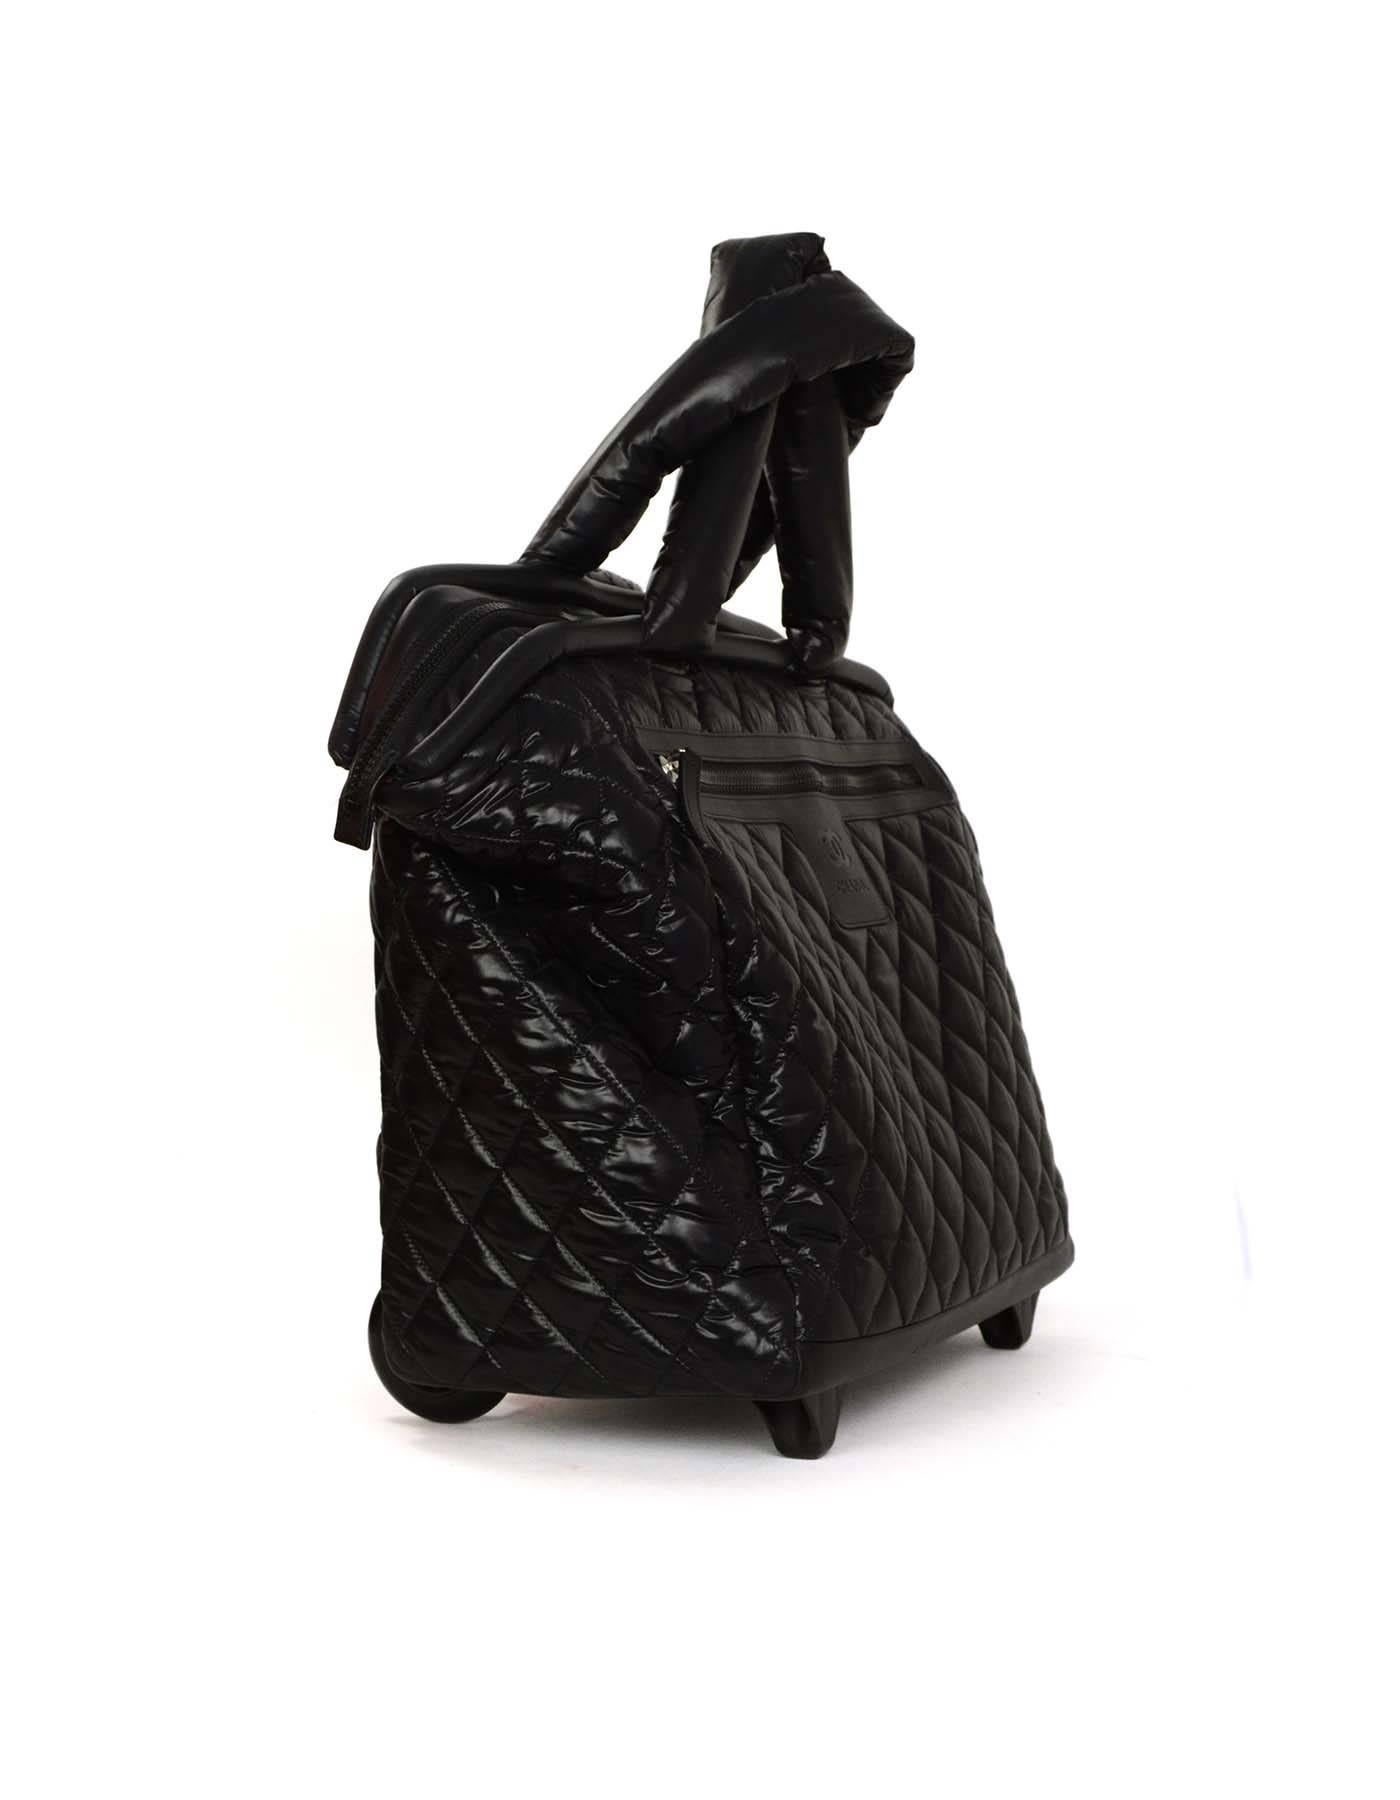 Chanel Black Coco Cocoon Quilted Trolley Luggage 
Features interlocking double-C logo embossed leather detail at front 

Made In: Italy
Year of Production: 2013
Color: Black
Hardware: Silver 
Materials: Nylon, leather and metal
Lining: